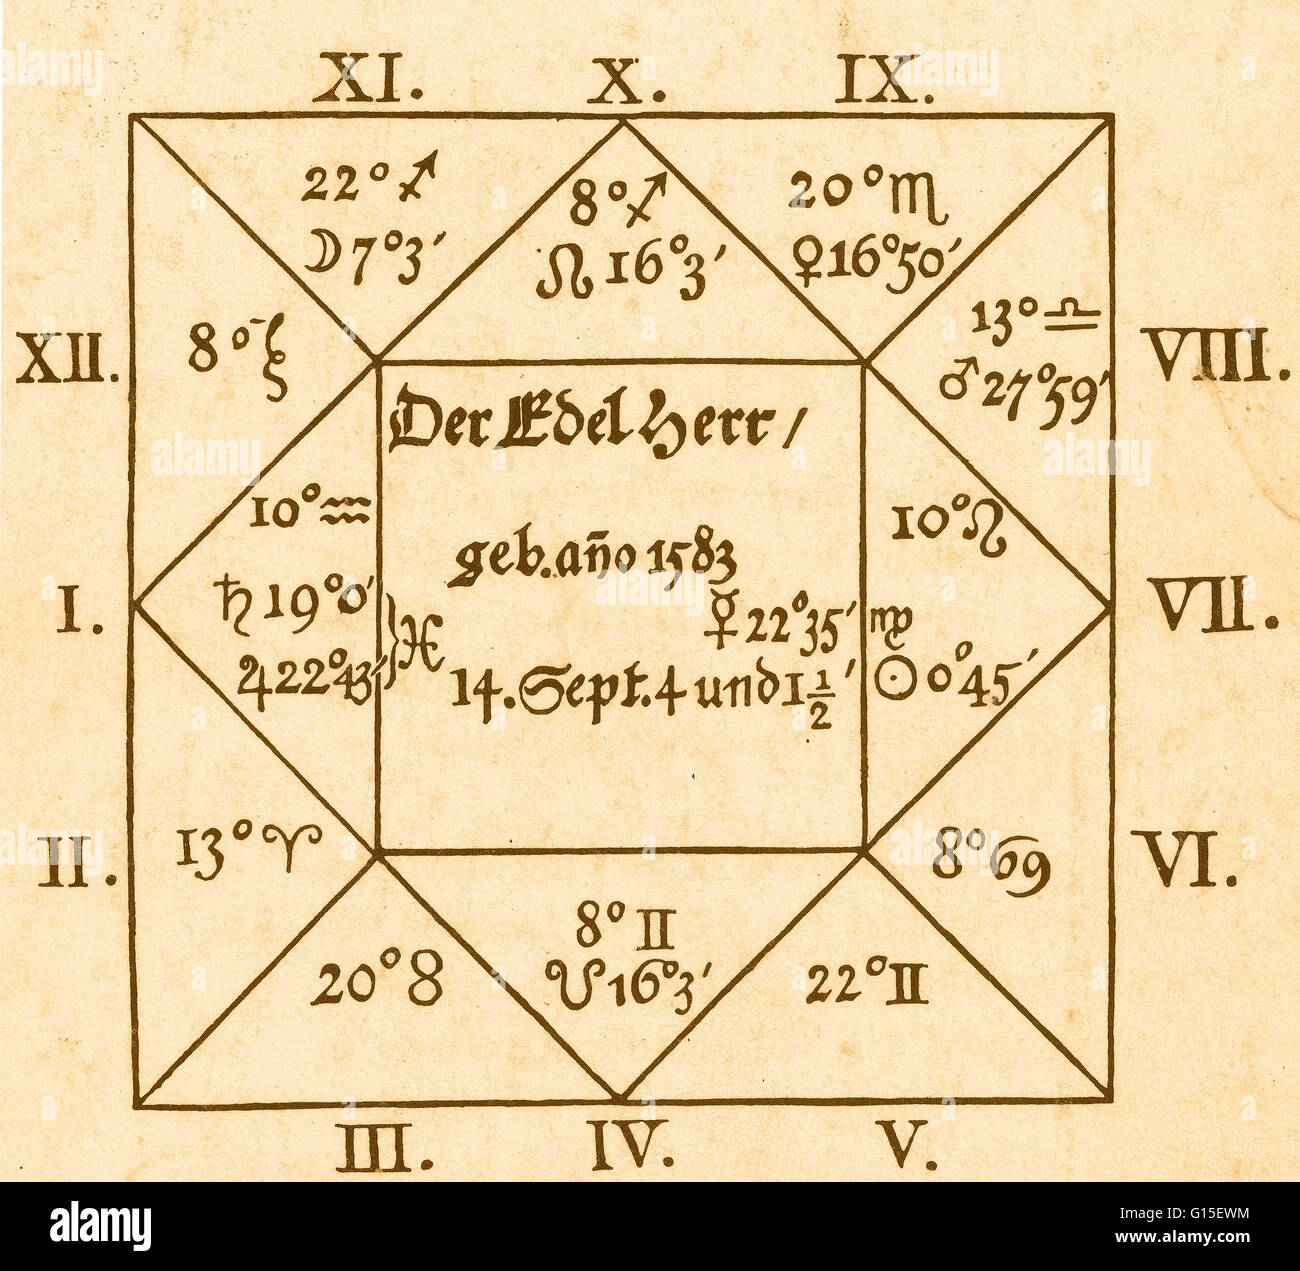 Cast for Albrecht von Wallenstein when he was 25 by the astronomer Johannes Kepler, accurately foretold a life of ambition and violence. The center square gives the date and time of his birth and identifies him in German as 'The Noble Man'; the figures in Stock Photo